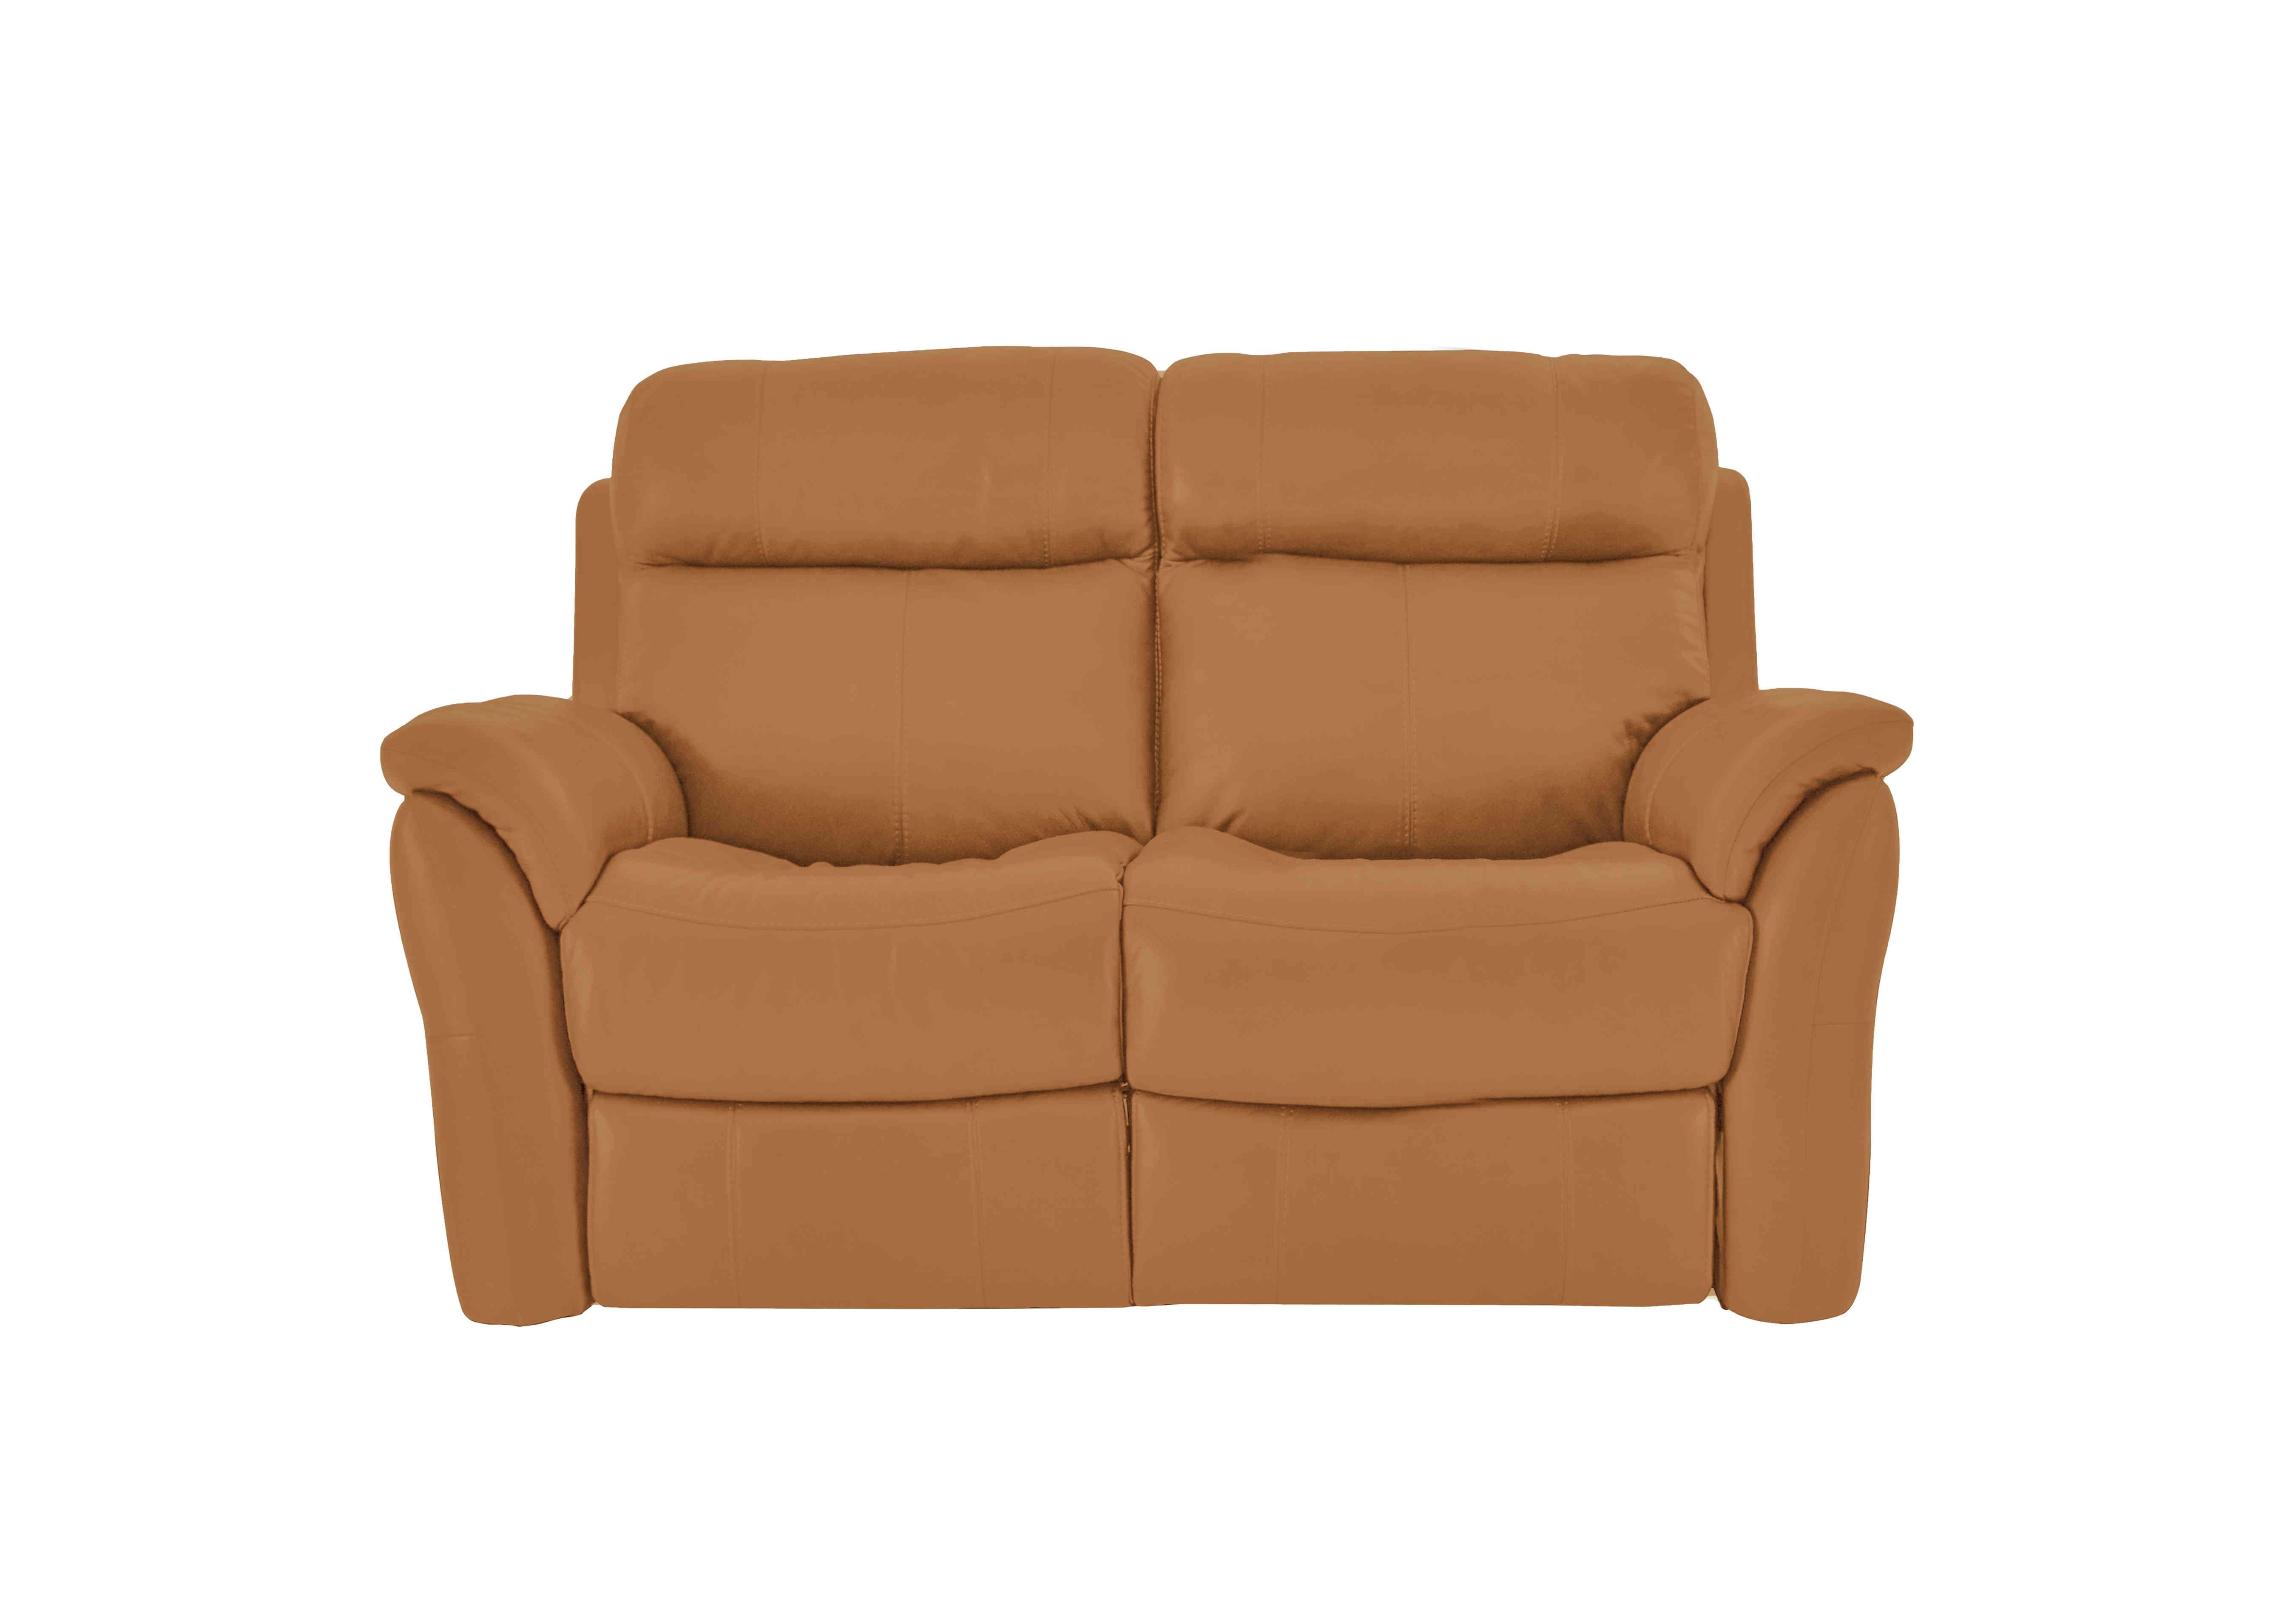 Relax Station Revive 2 Seater Leather Sofa in Bv-335e Honey Yellow on Furniture Village